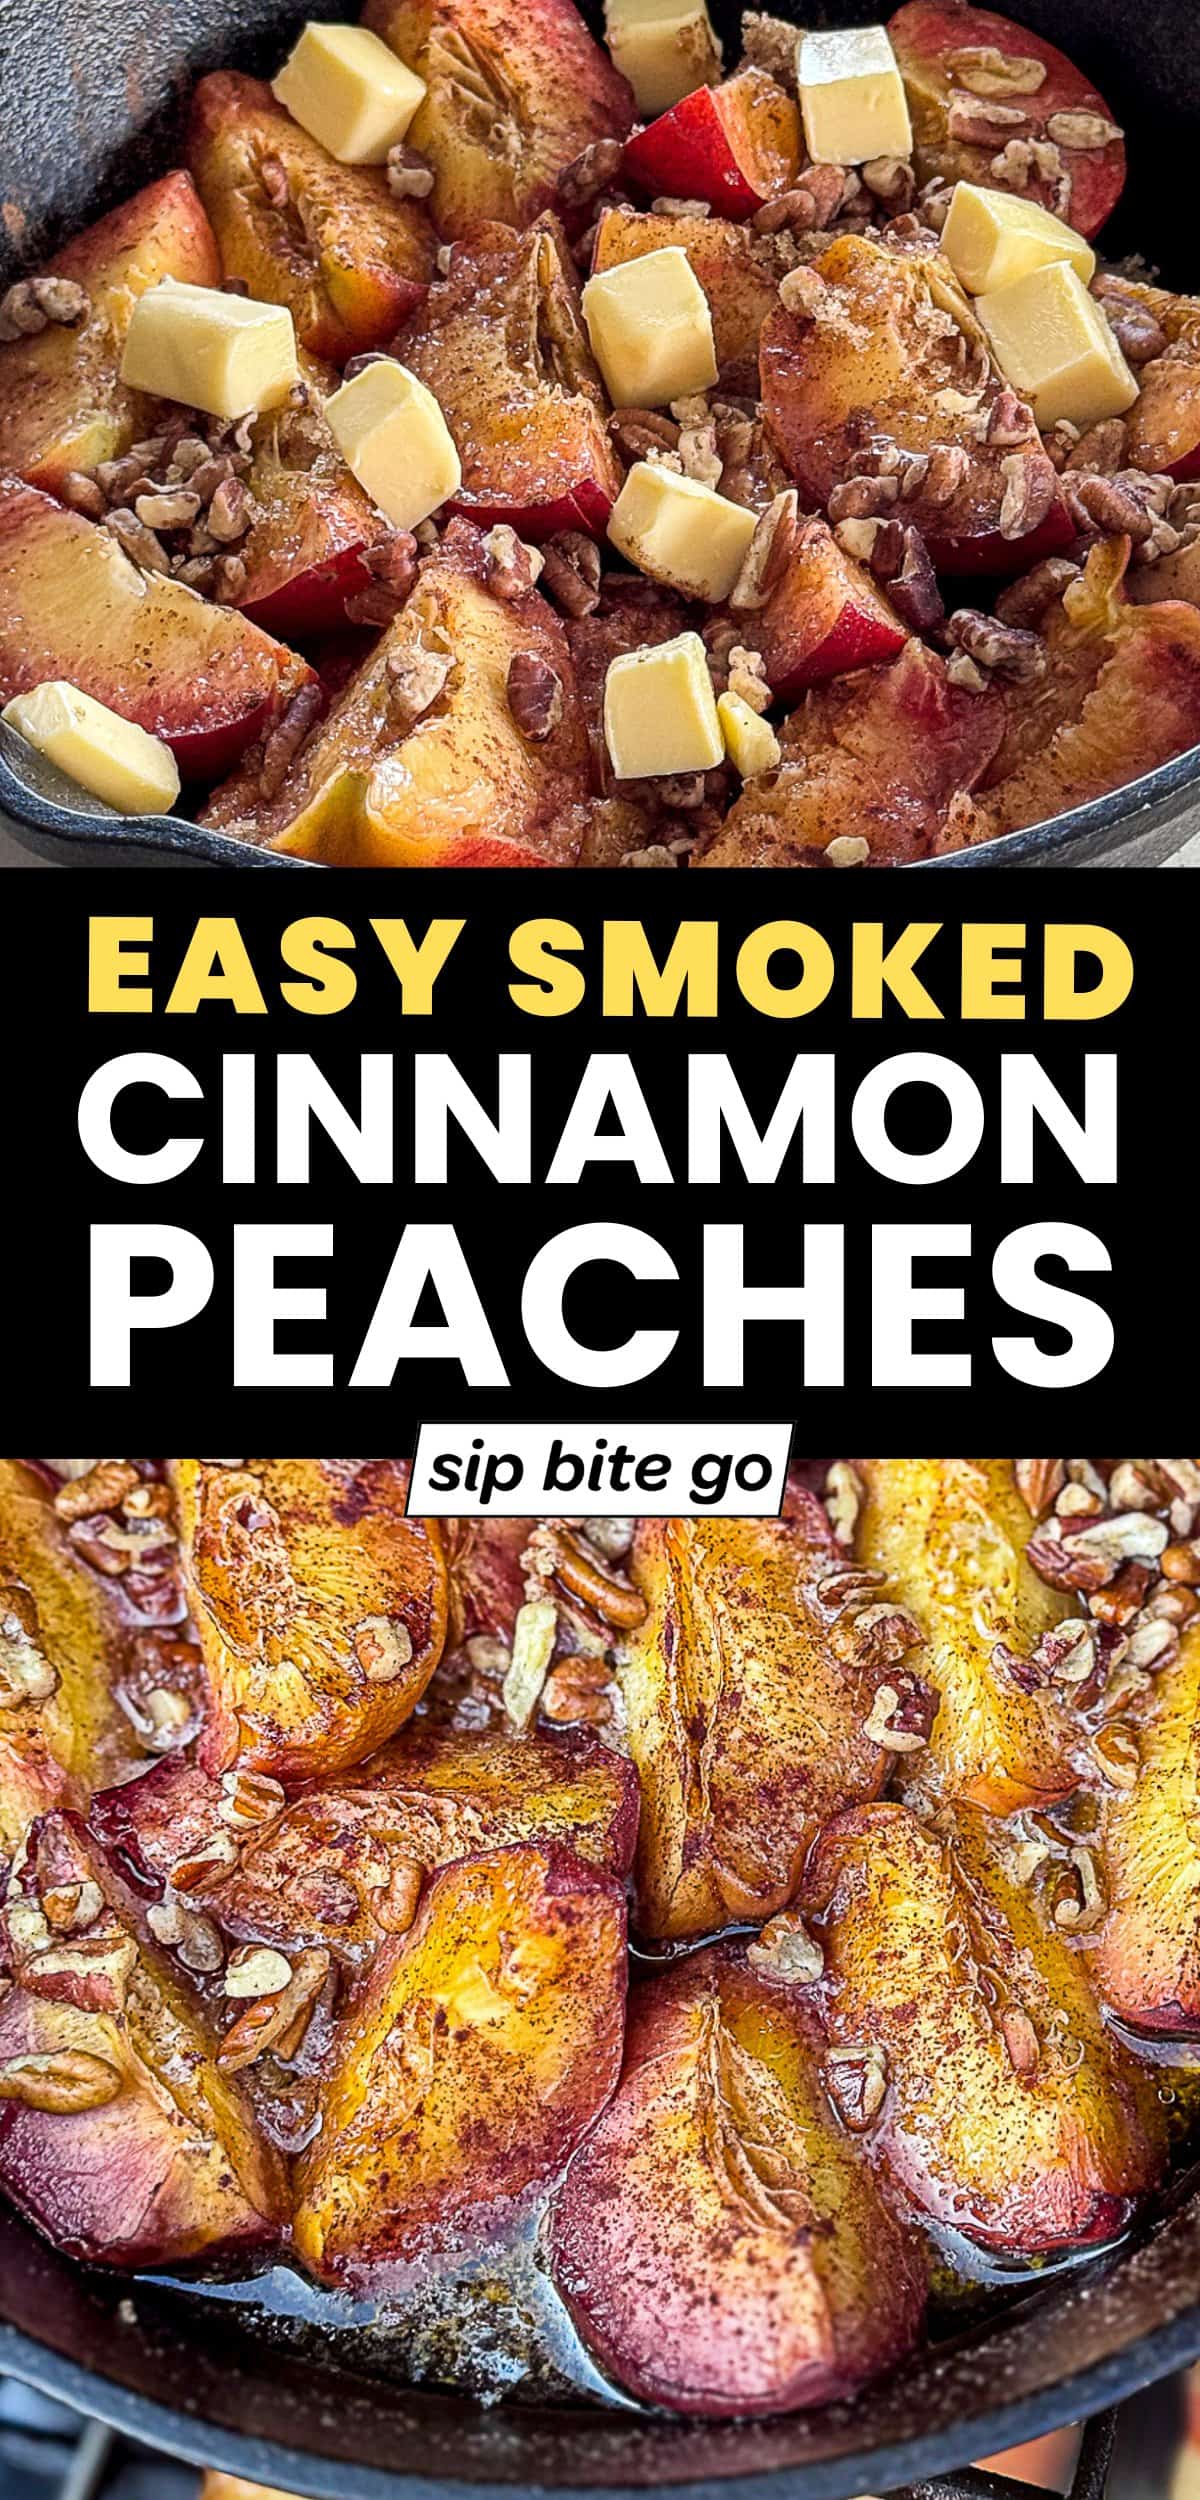 Smoked Cinnamon Peaches With Pecans DESSERT on the Traeger pellet grill